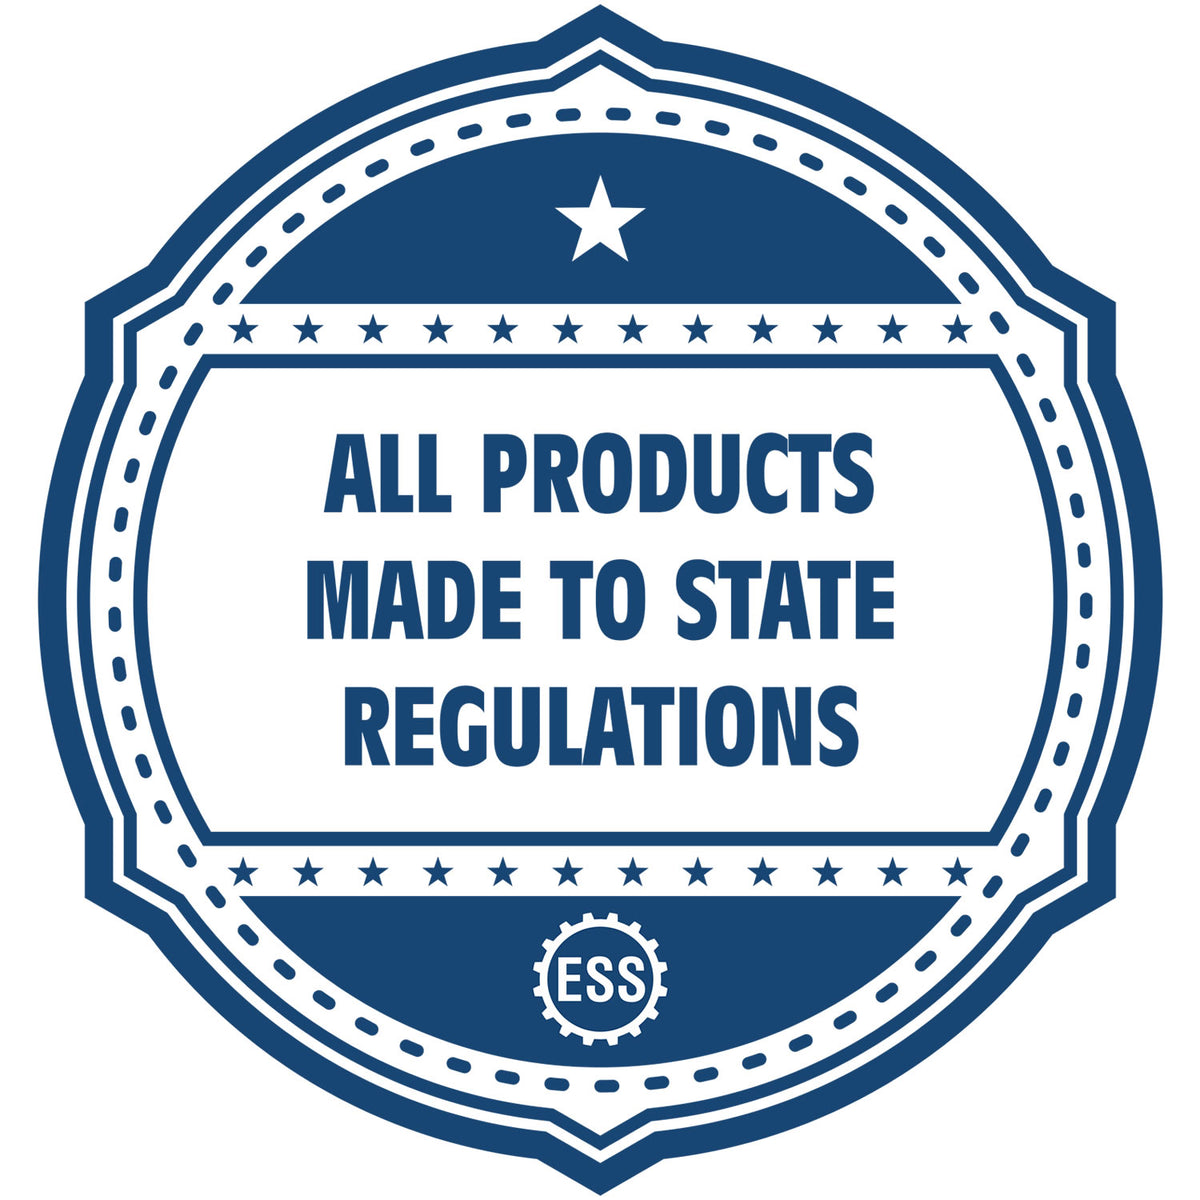 An icon or badge element for the Texas Desk Architect Embossing Seal showing that this product is made in compliance with state regulations.